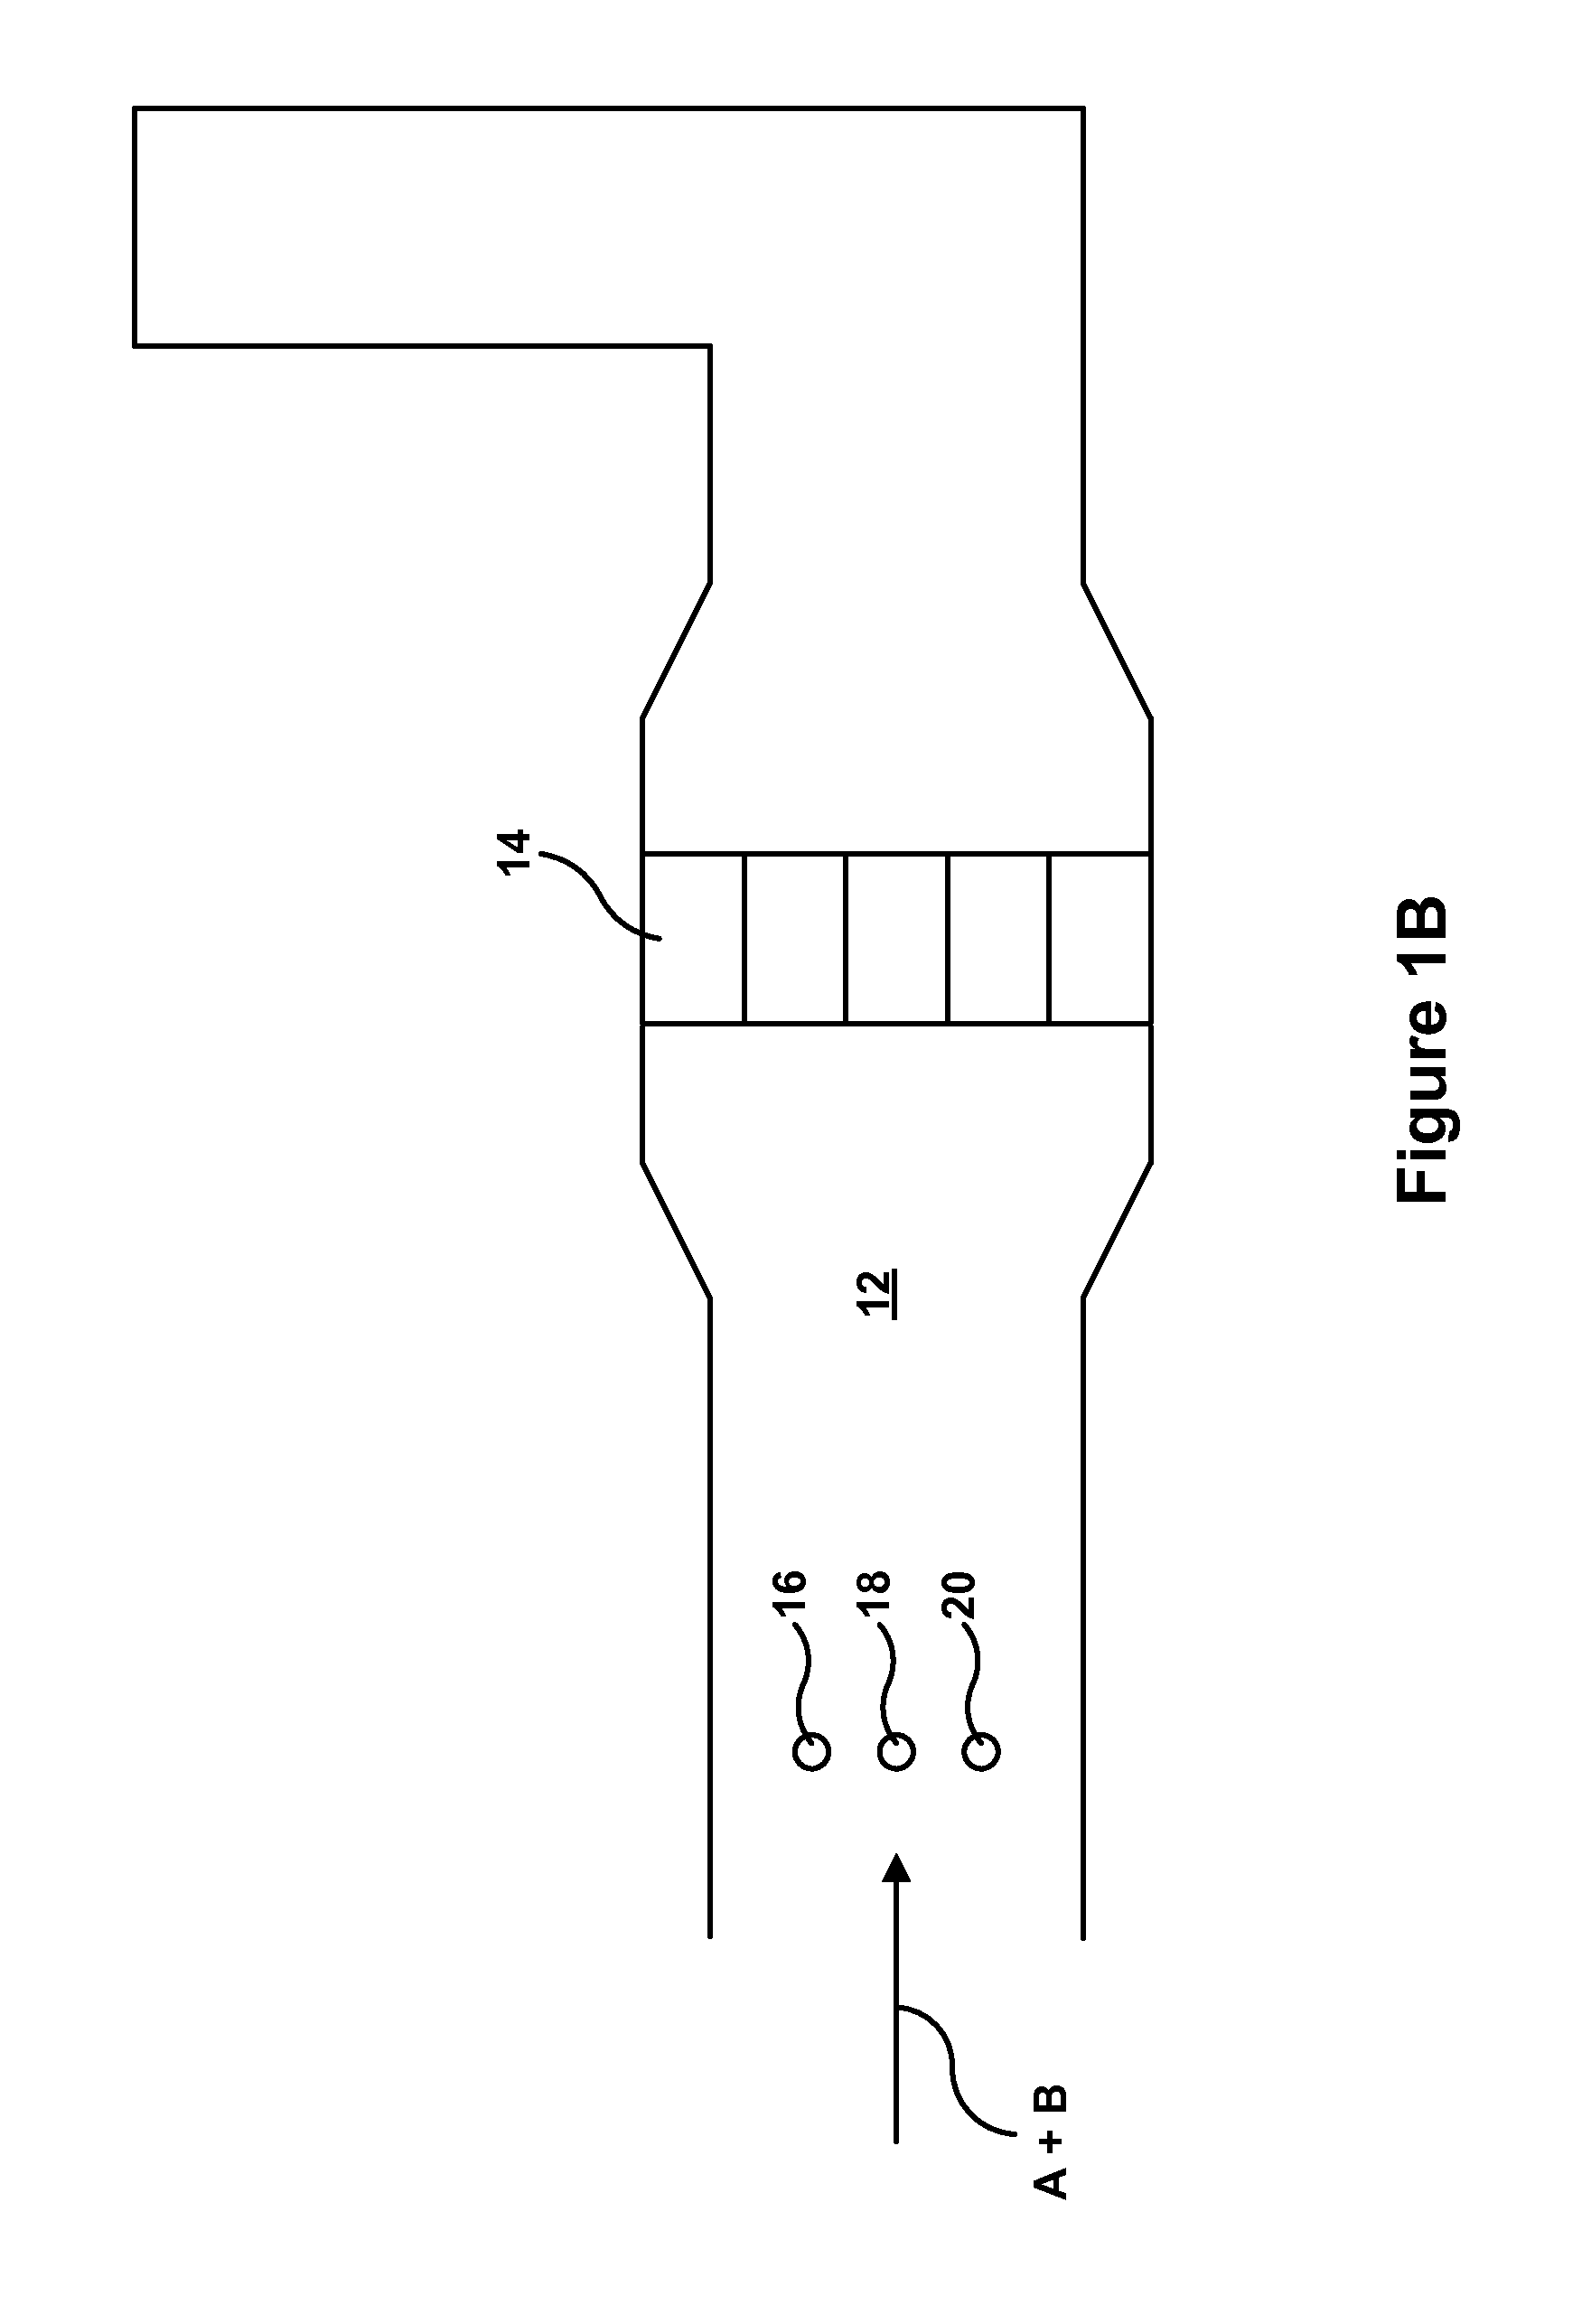 System and Method for Sequential Injection of Reagent to Reduce NOx from Combustion Sources